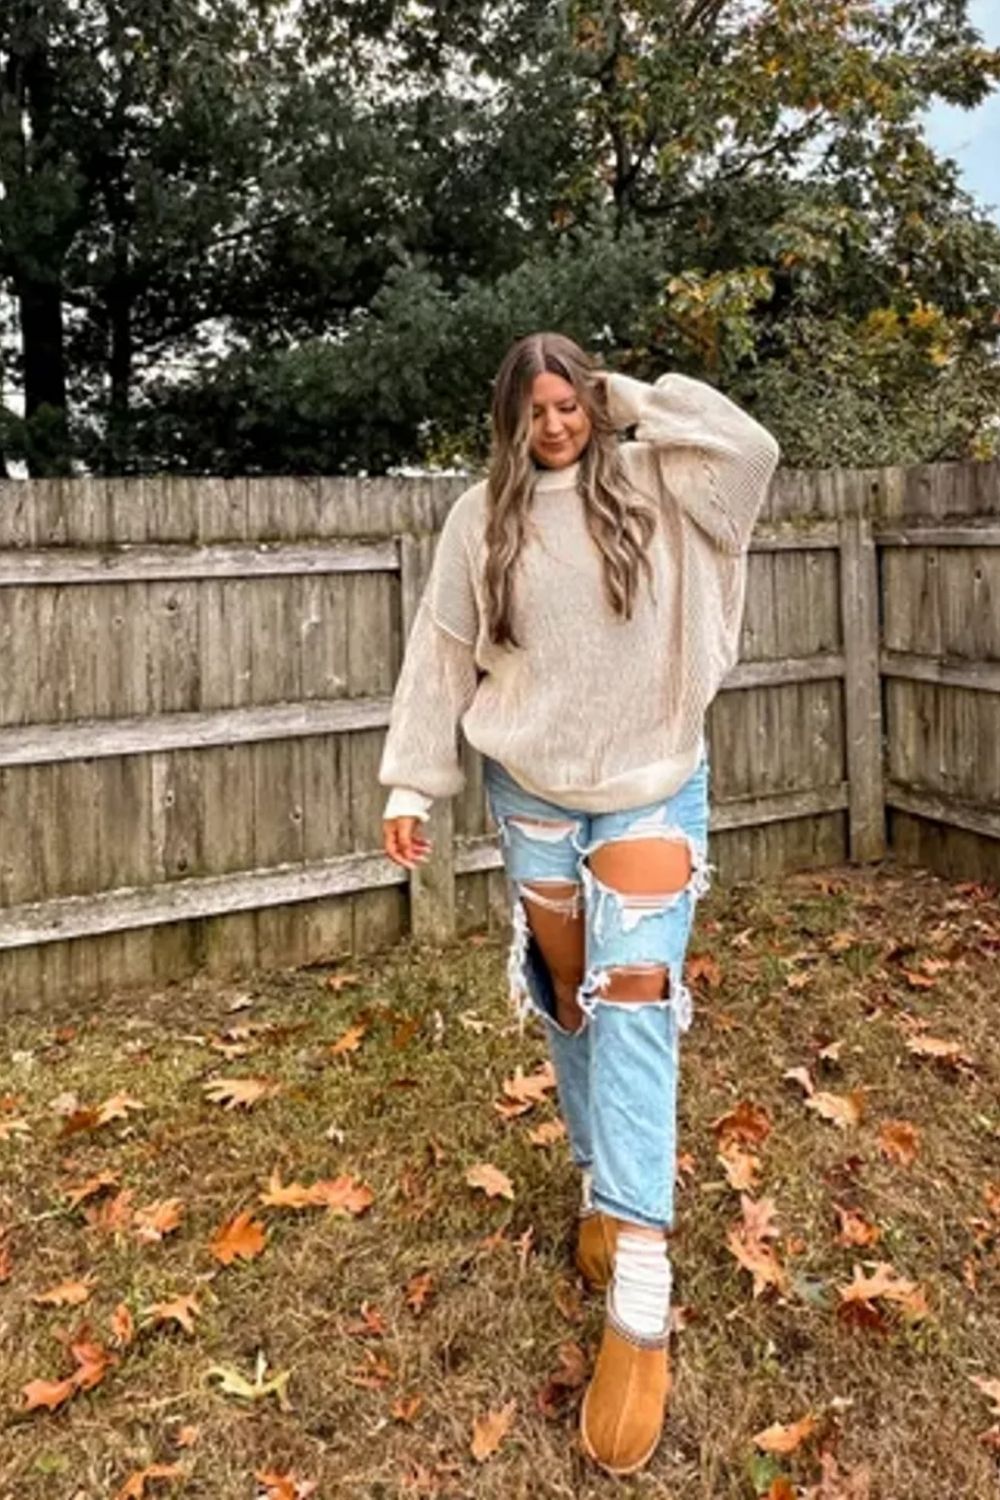 The oversized, chunky knit sweater creates a cozy, relaxed vibe perfect for fall, complemented by ripped denim for an edgy contrast and warm-toned boots that tie the look together.